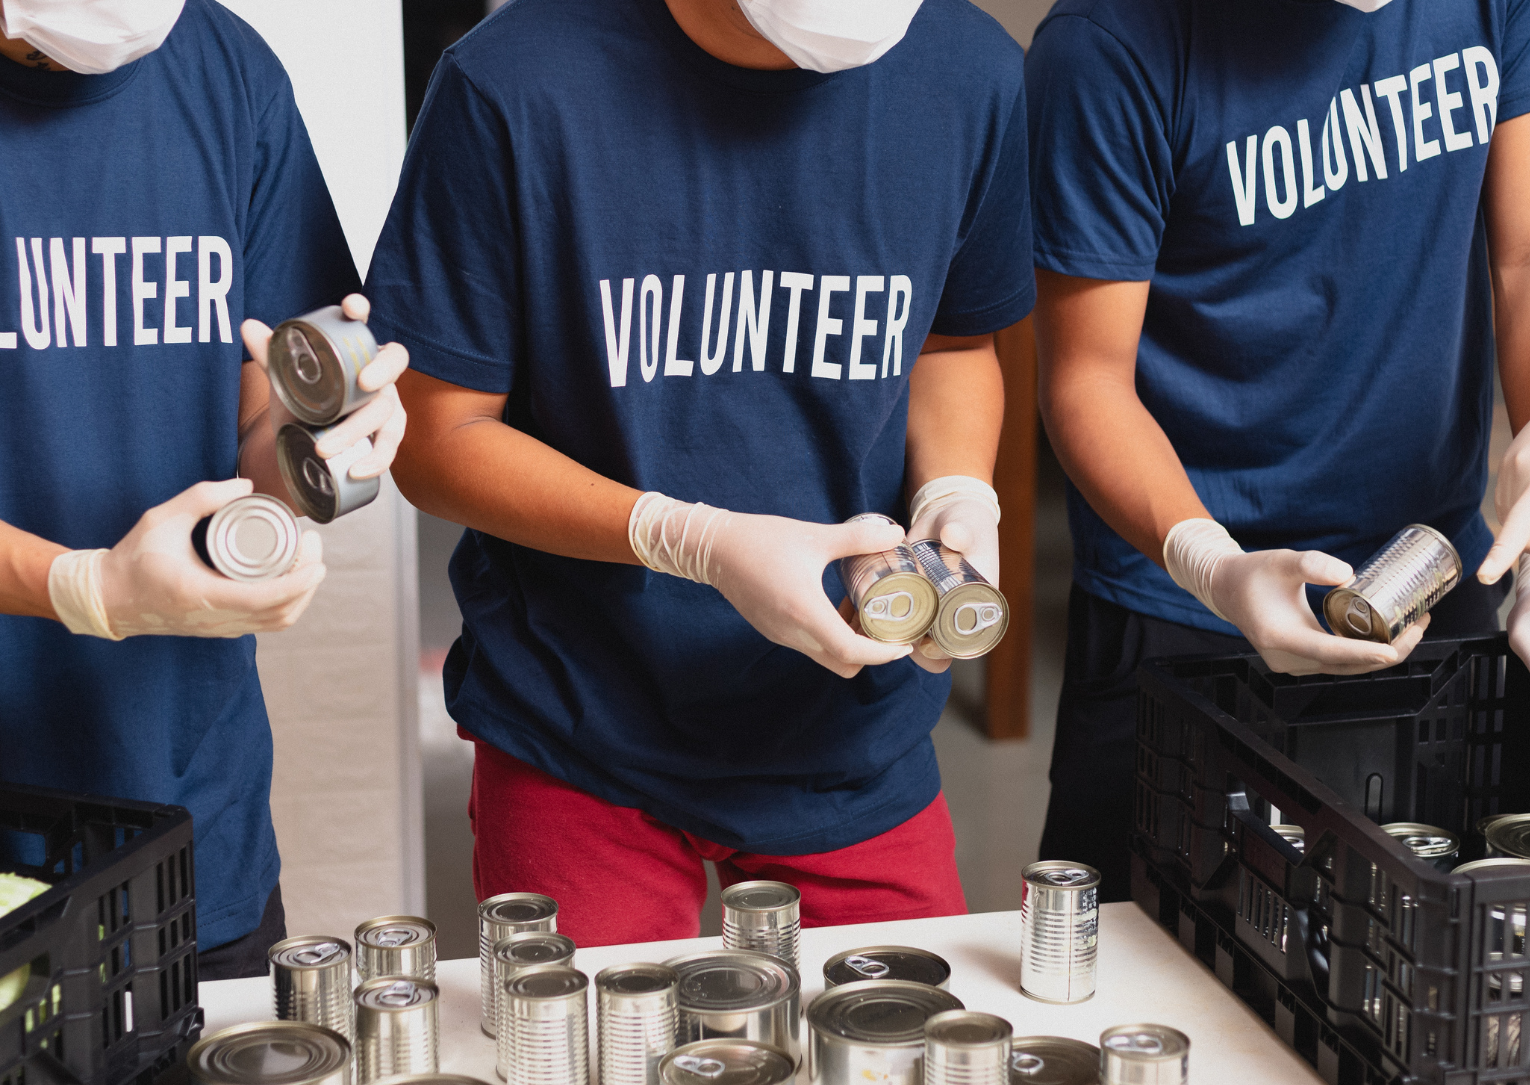 three people with volunteer shirts sorting cans